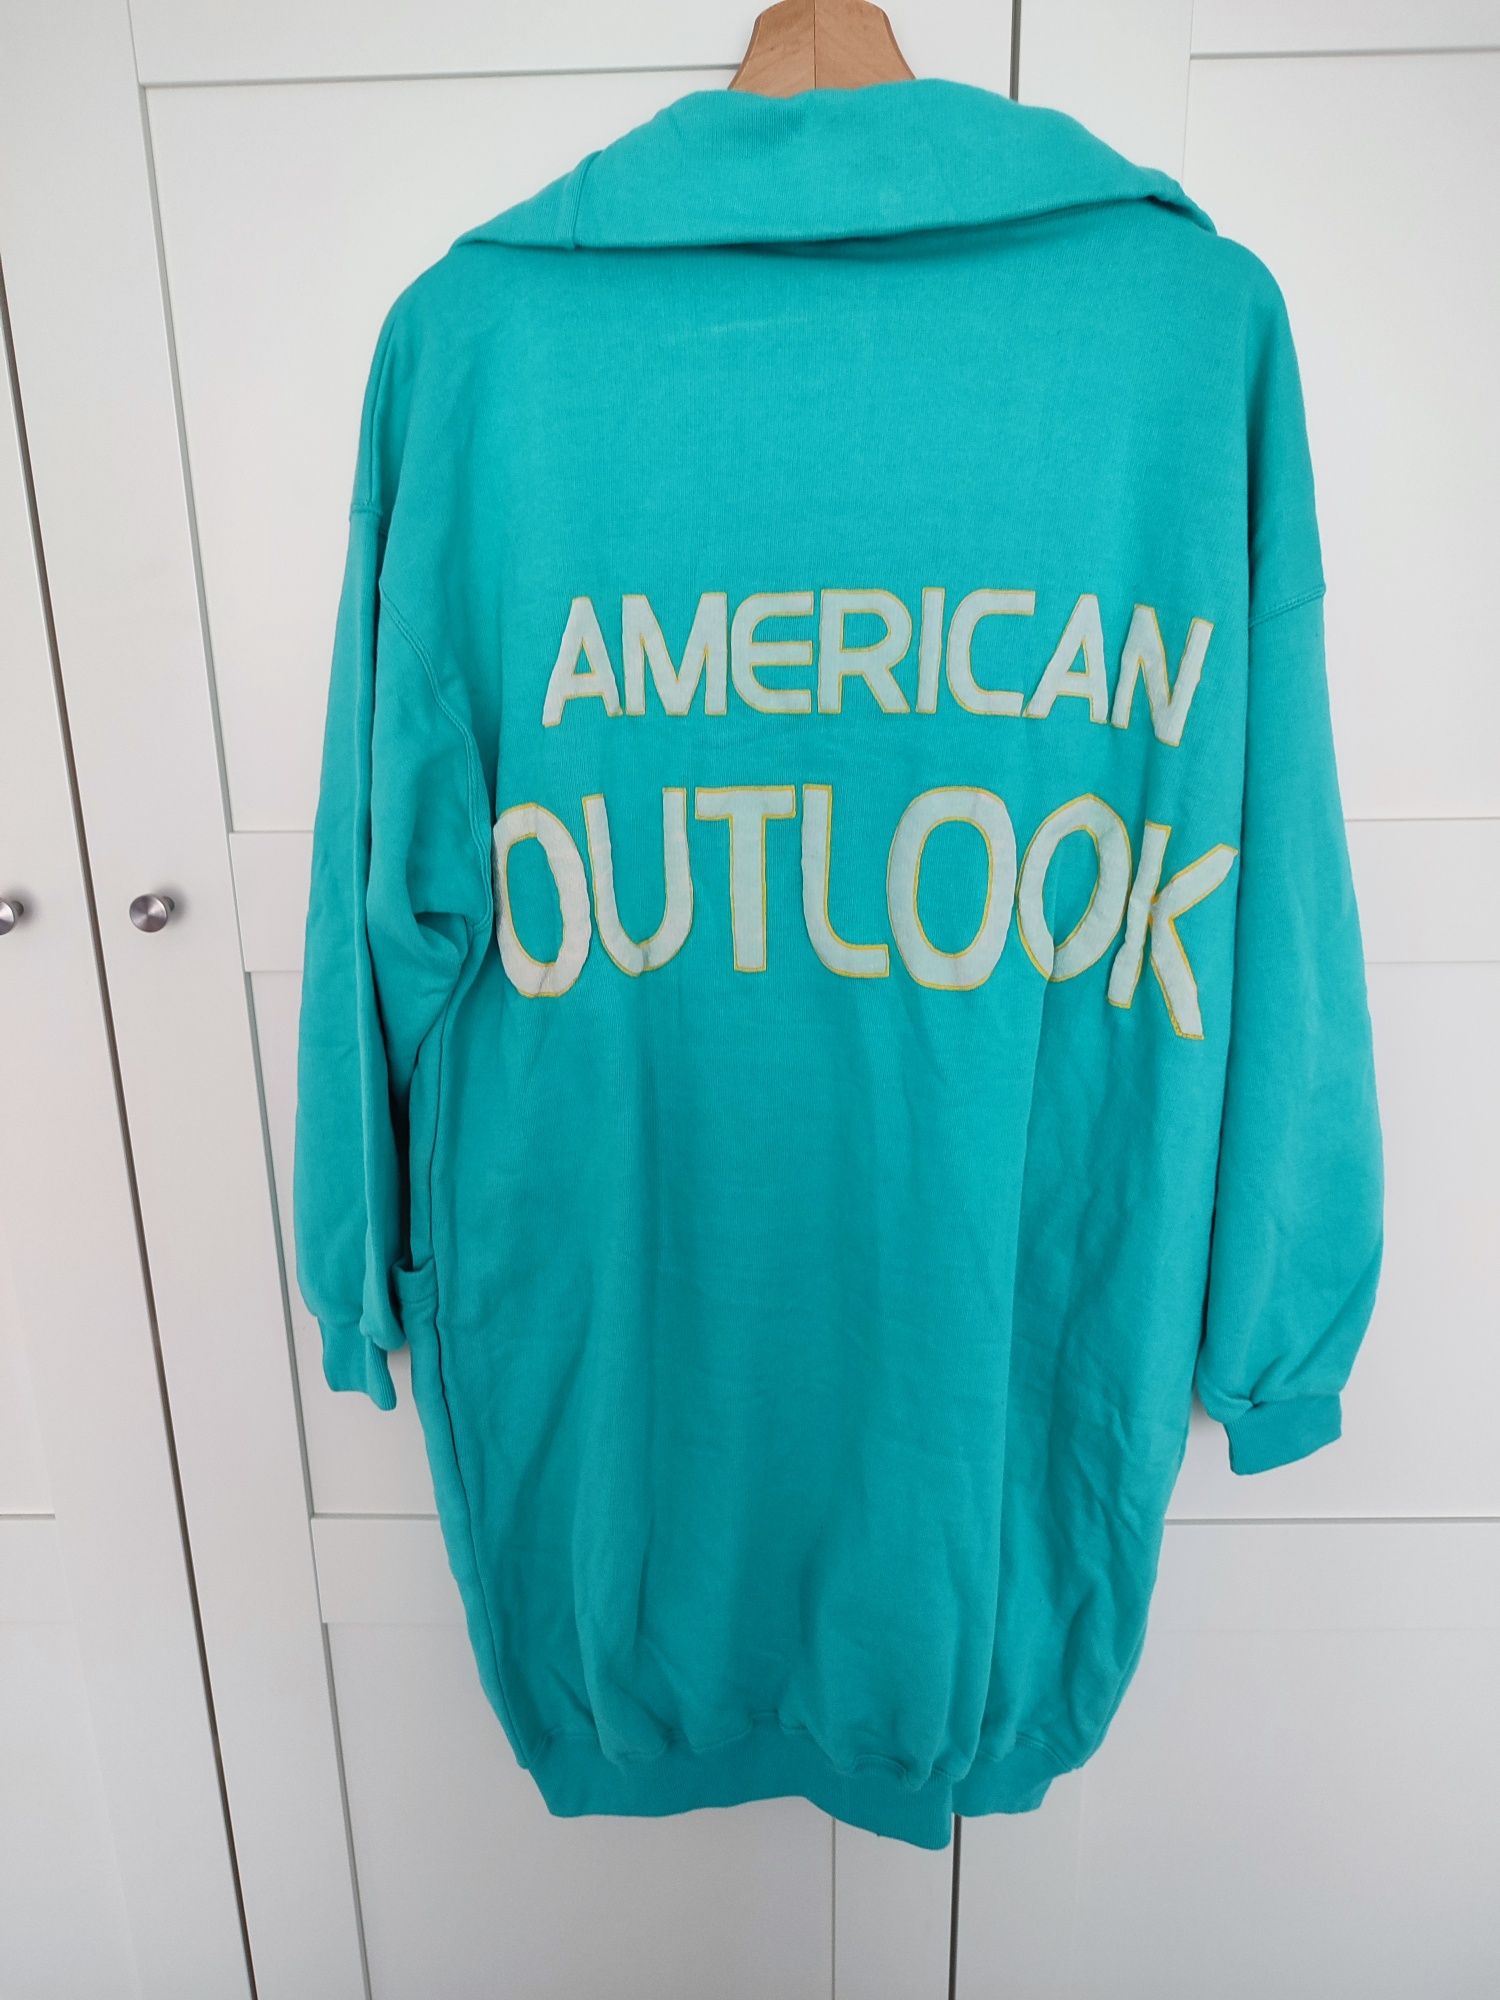 Vintage bluza tunika American Outlook by Network M